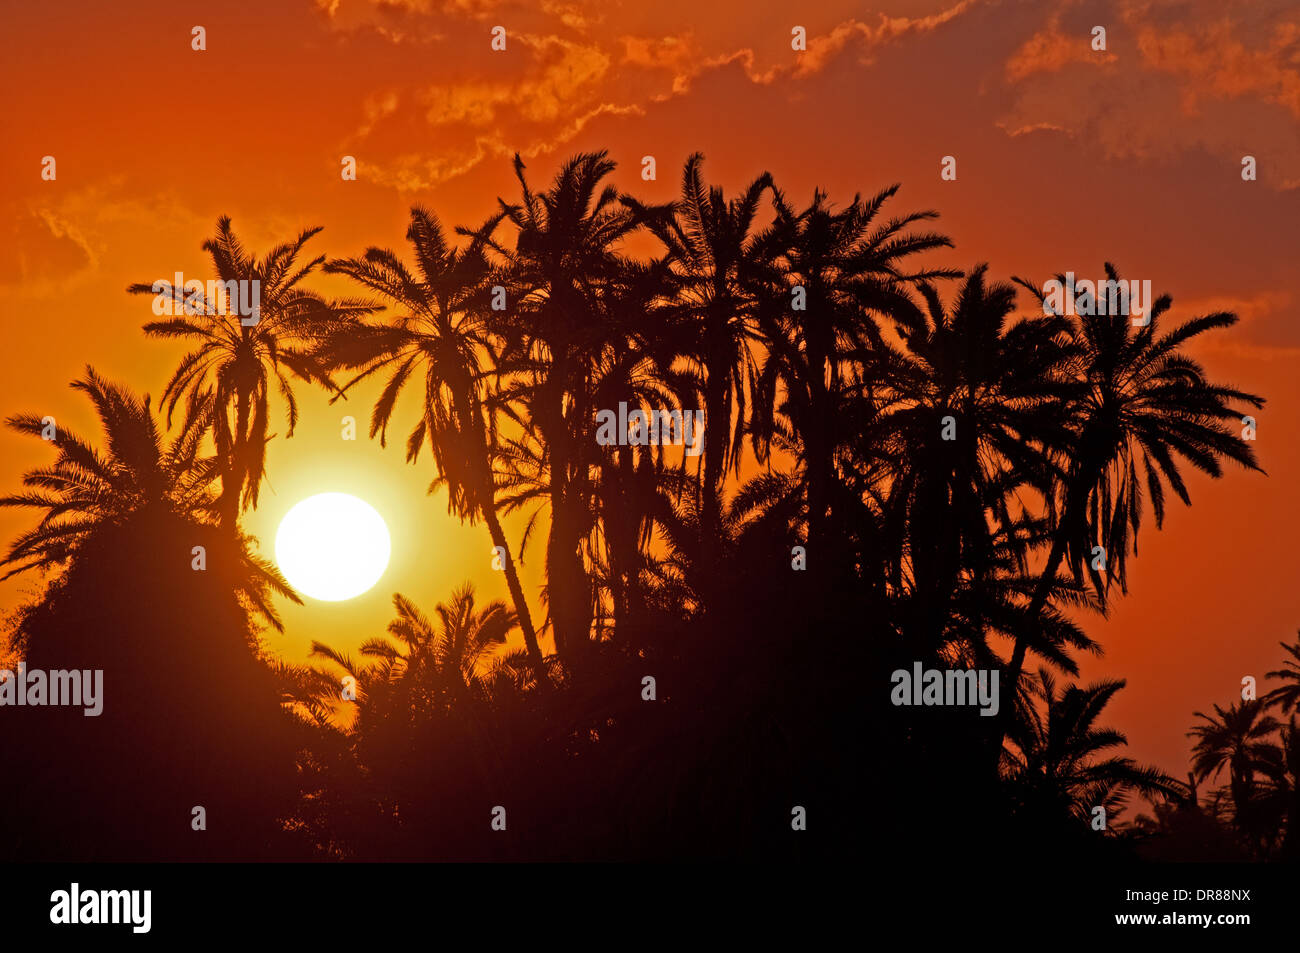 Palm trees silhouetted against orange sun and sunset sky in Amboseli National Park Kenya East Africa Stock Photo